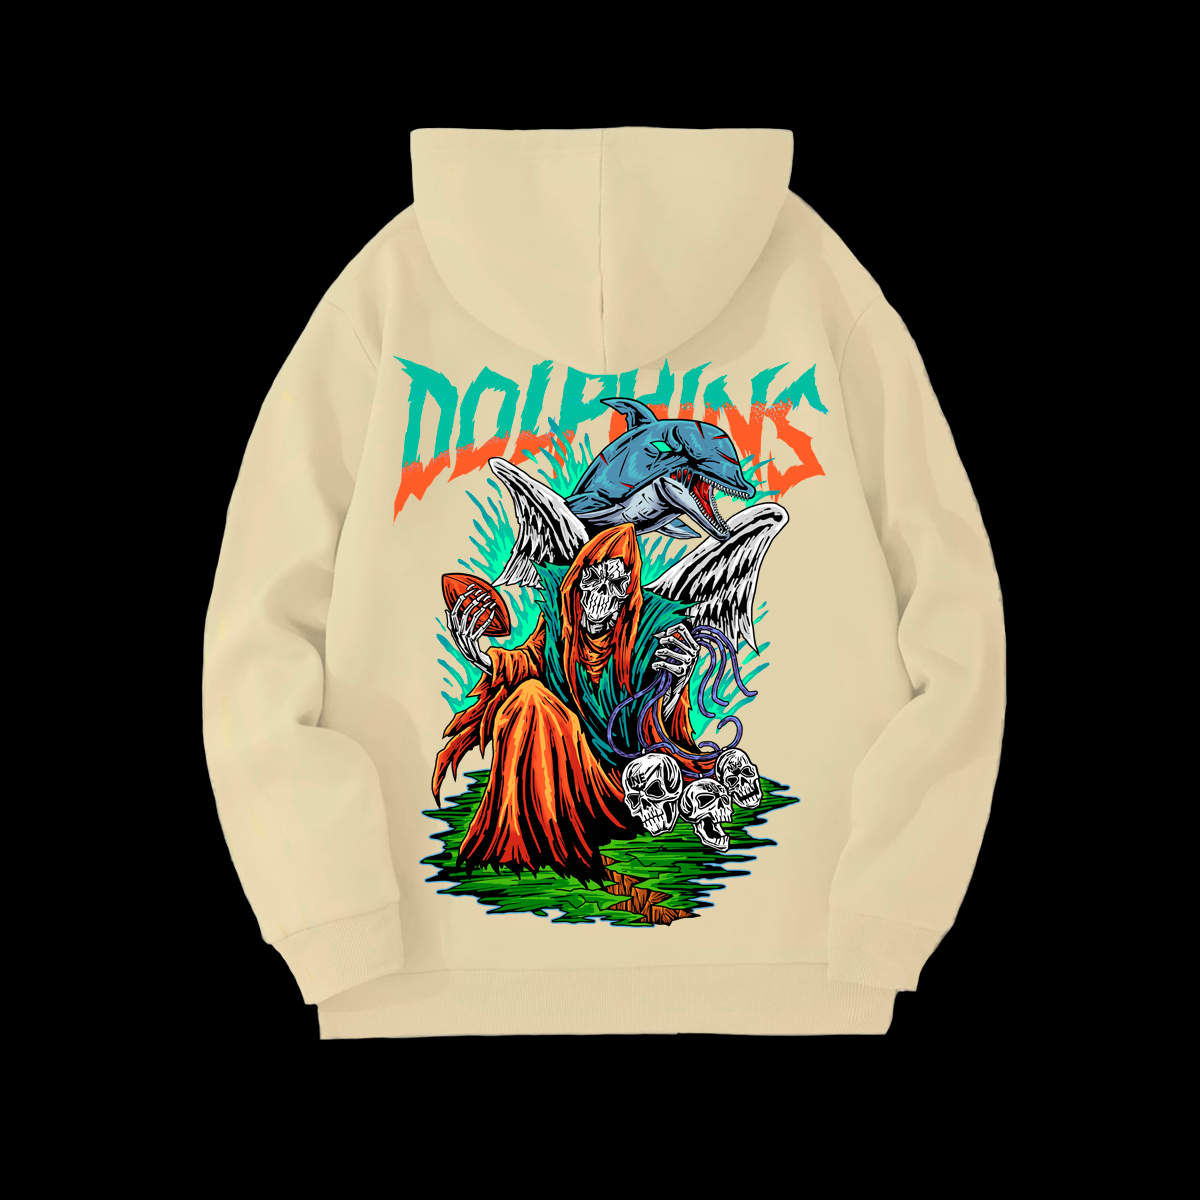 INCARNAPE DOLPHINS "WE'RE IN THE HUNT" PULL-OVER HOODIE